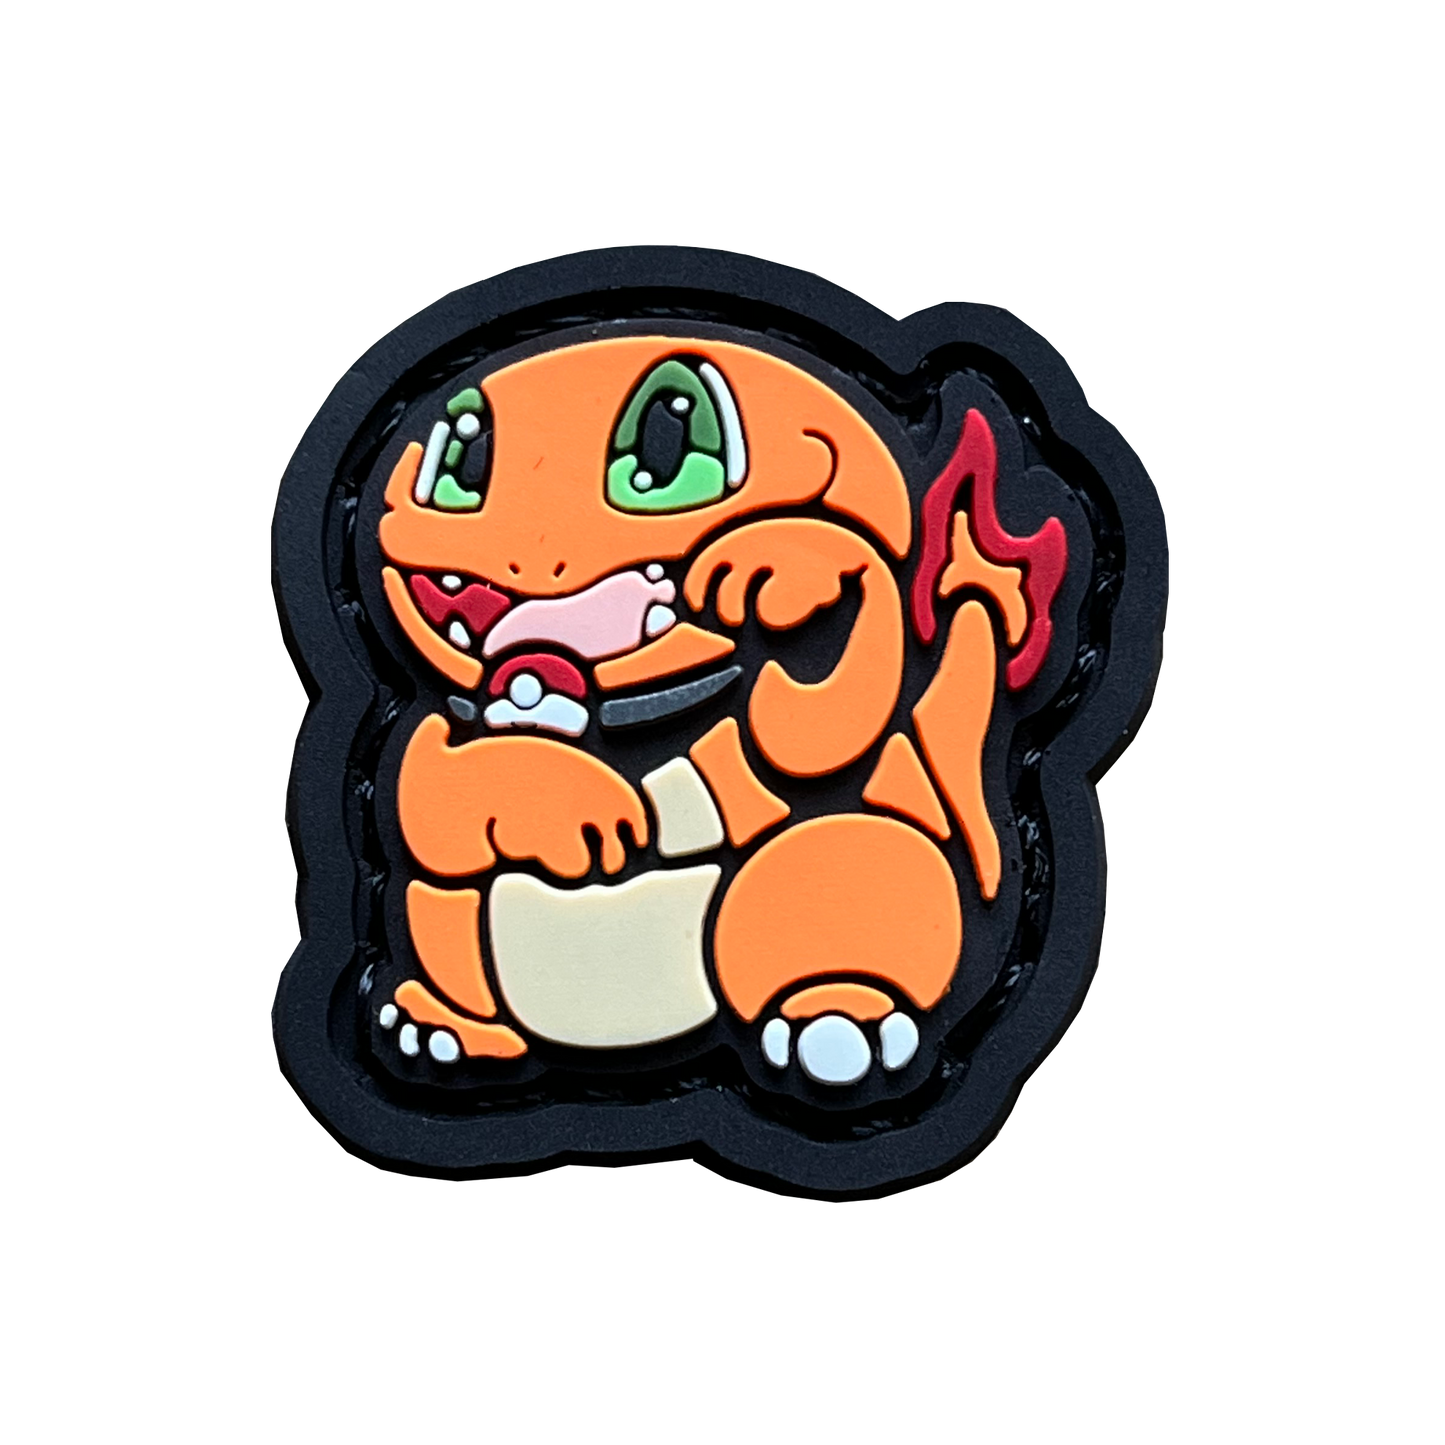 Charmander in the neko (lucky cat) pose. Wearing a poke ball necklace and smiling.